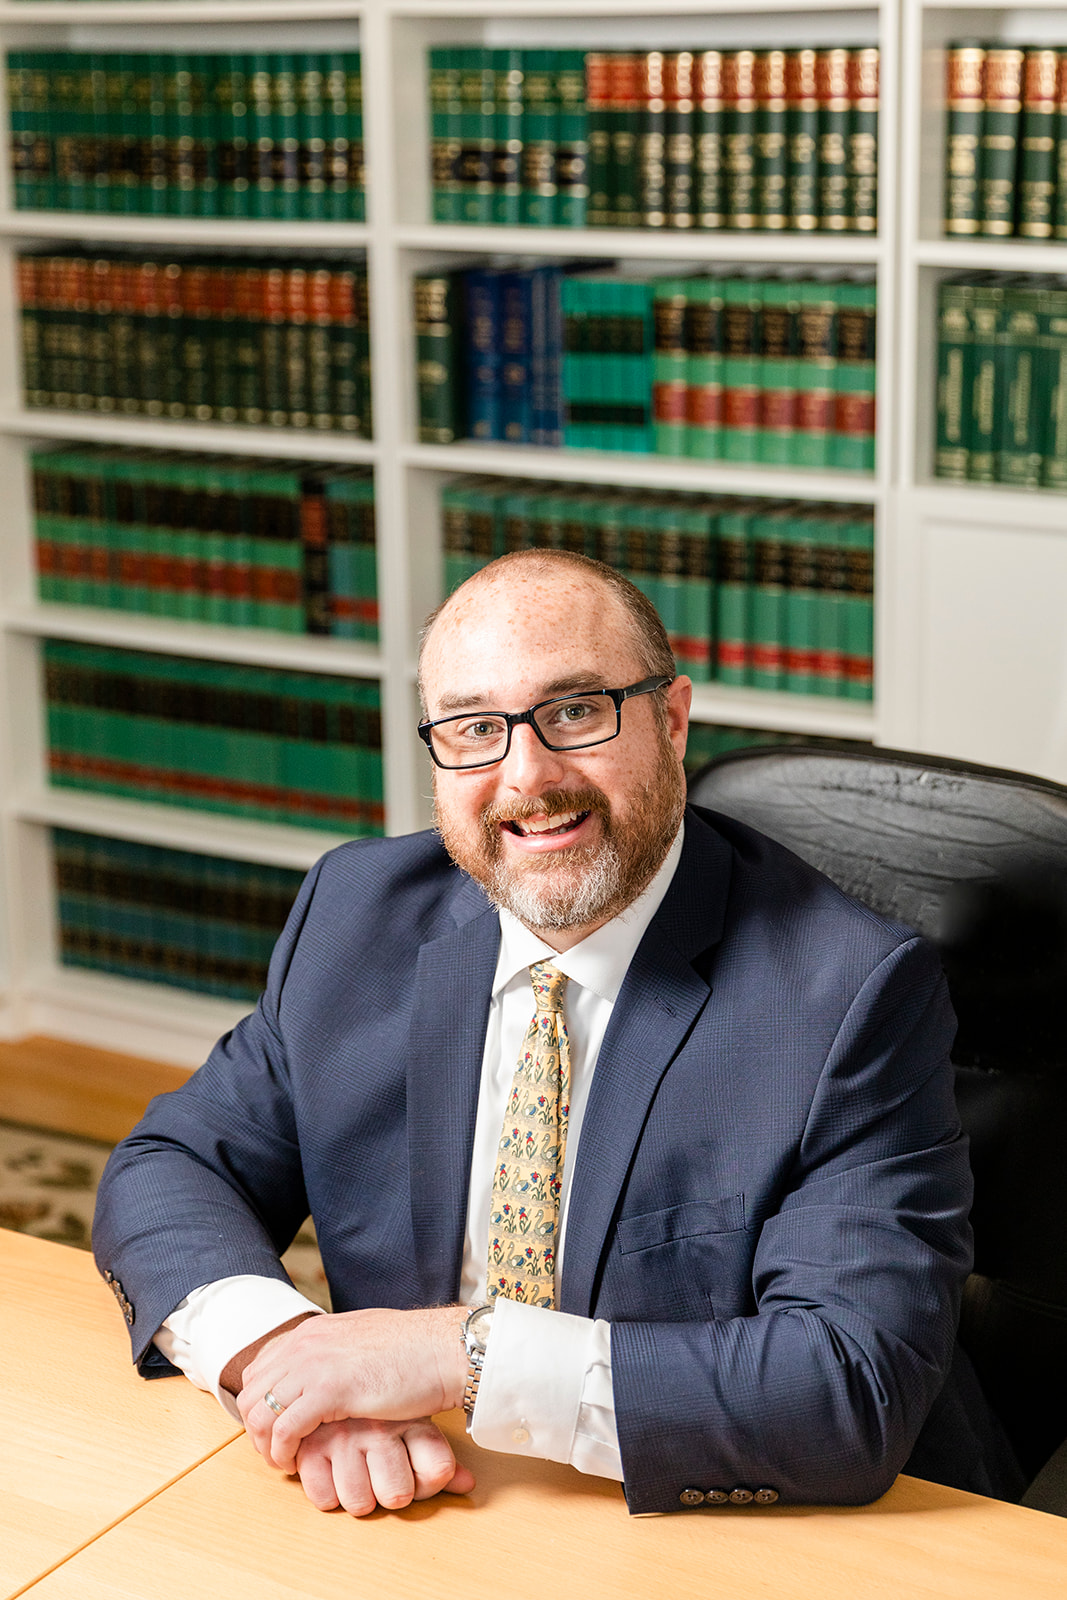 Nicholas B. Proy - Baltimore Maryland, Carroll County Attorney Lawyer pracitcing in Maryland and Pennsylvania